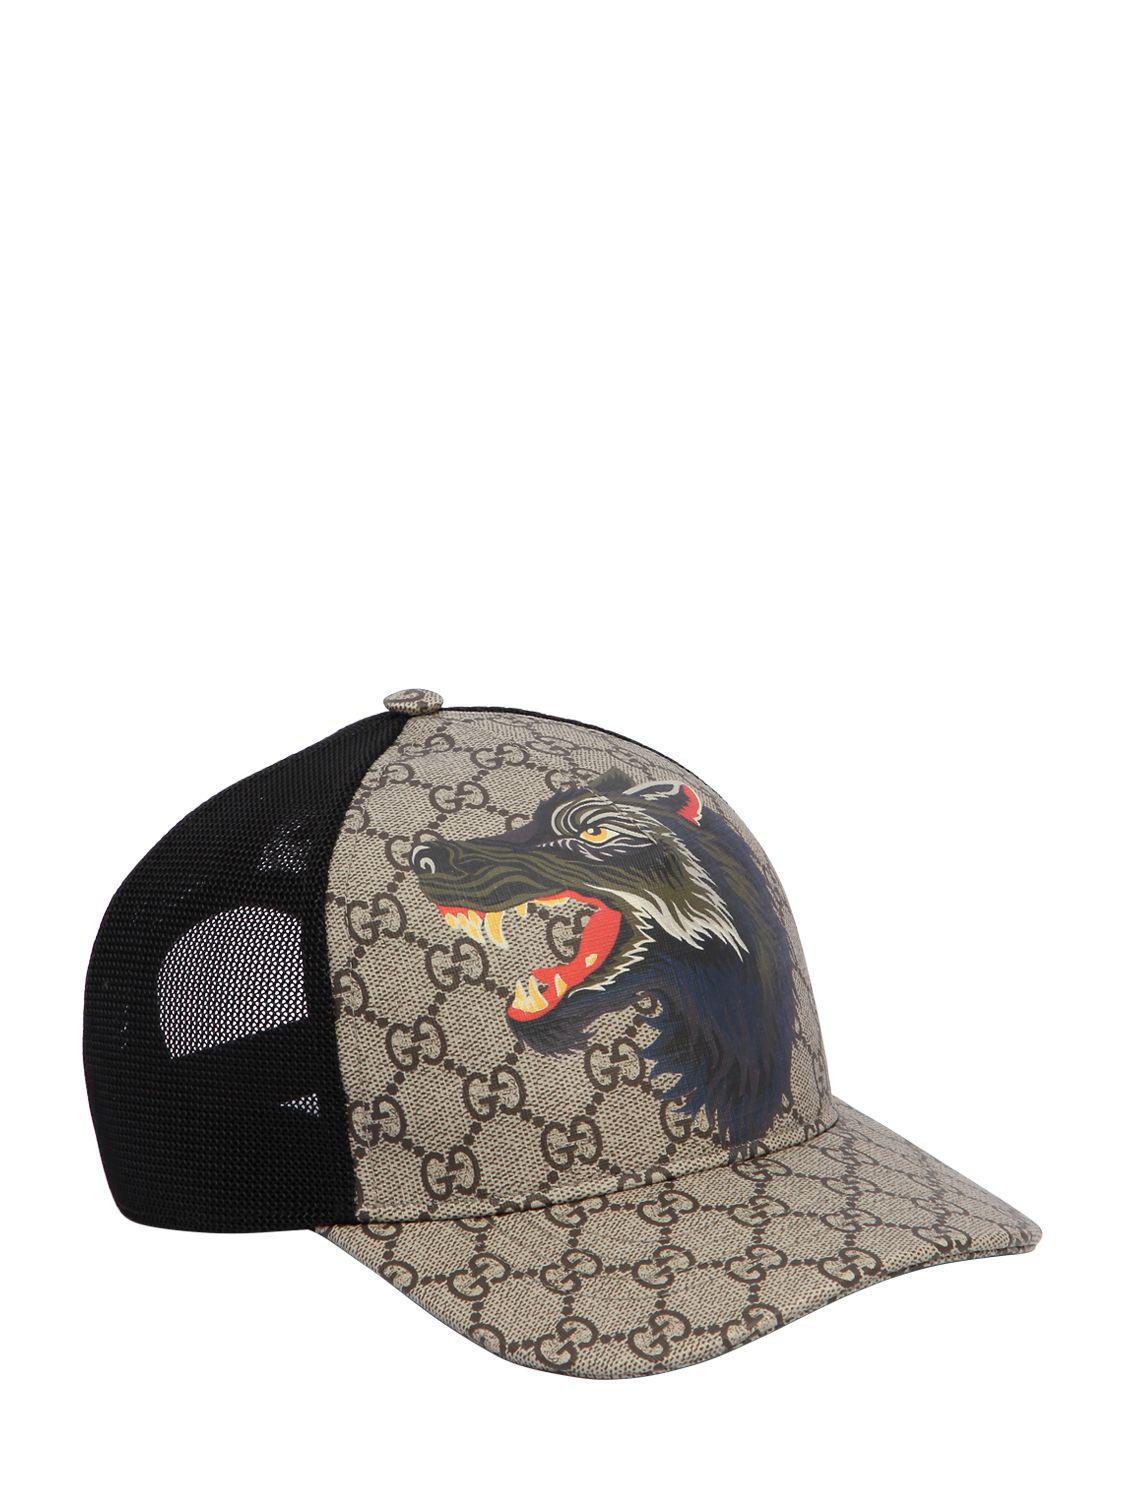 Gucci Wolf Printed Gg Supreme Baseball Hat in Black for Men - Lyst